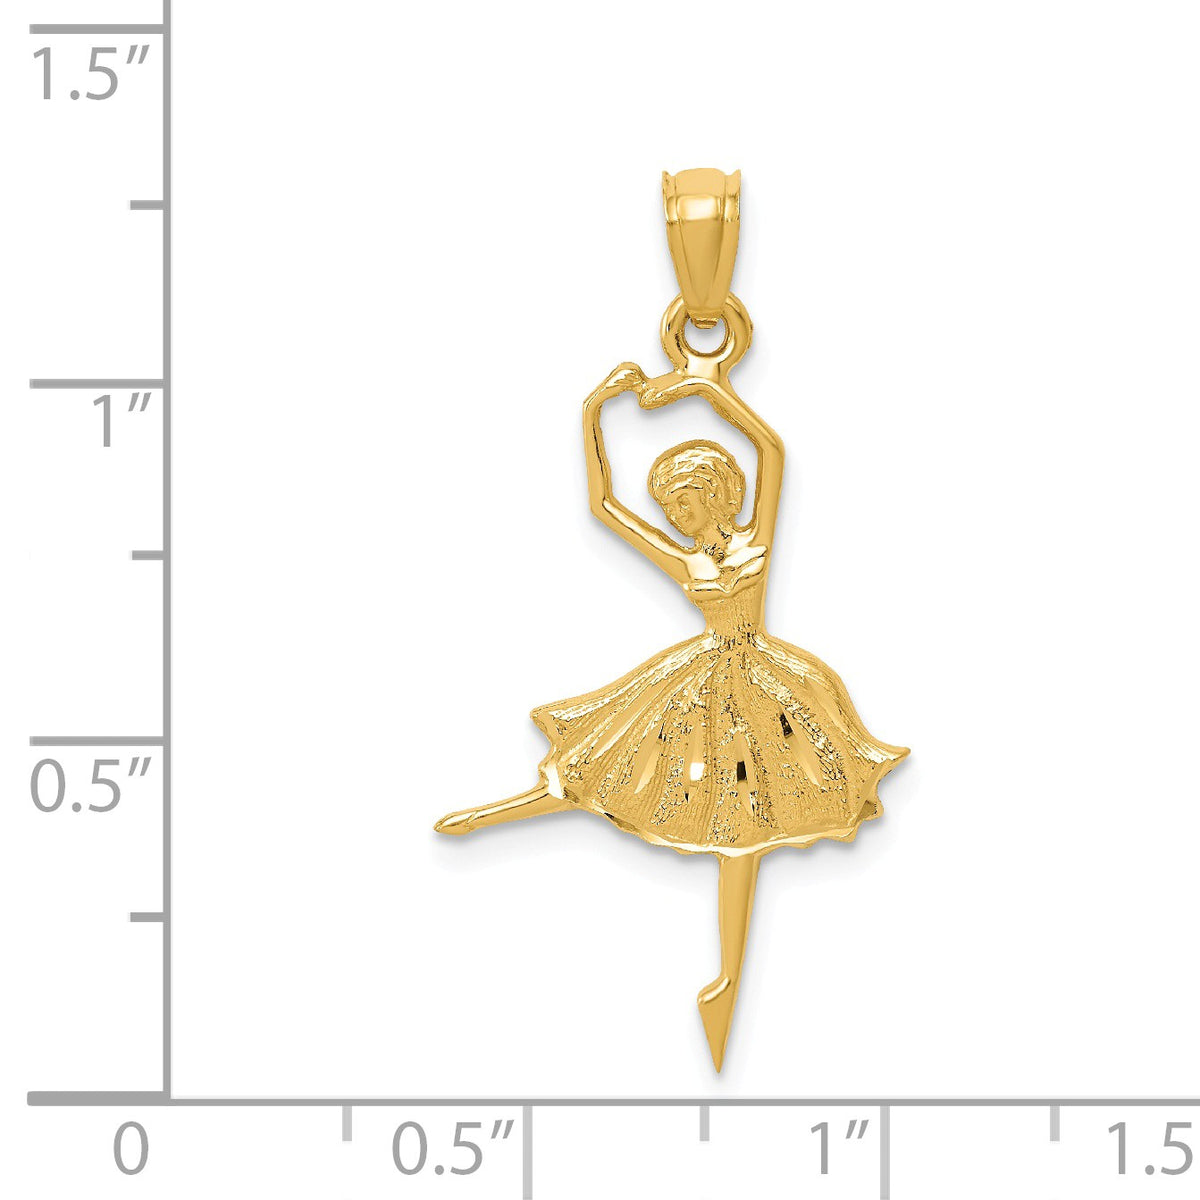 Alternate view of the 14k Yellow Gold Diamond Cut Dancing Ballerina Pendant by The Black Bow Jewelry Co.